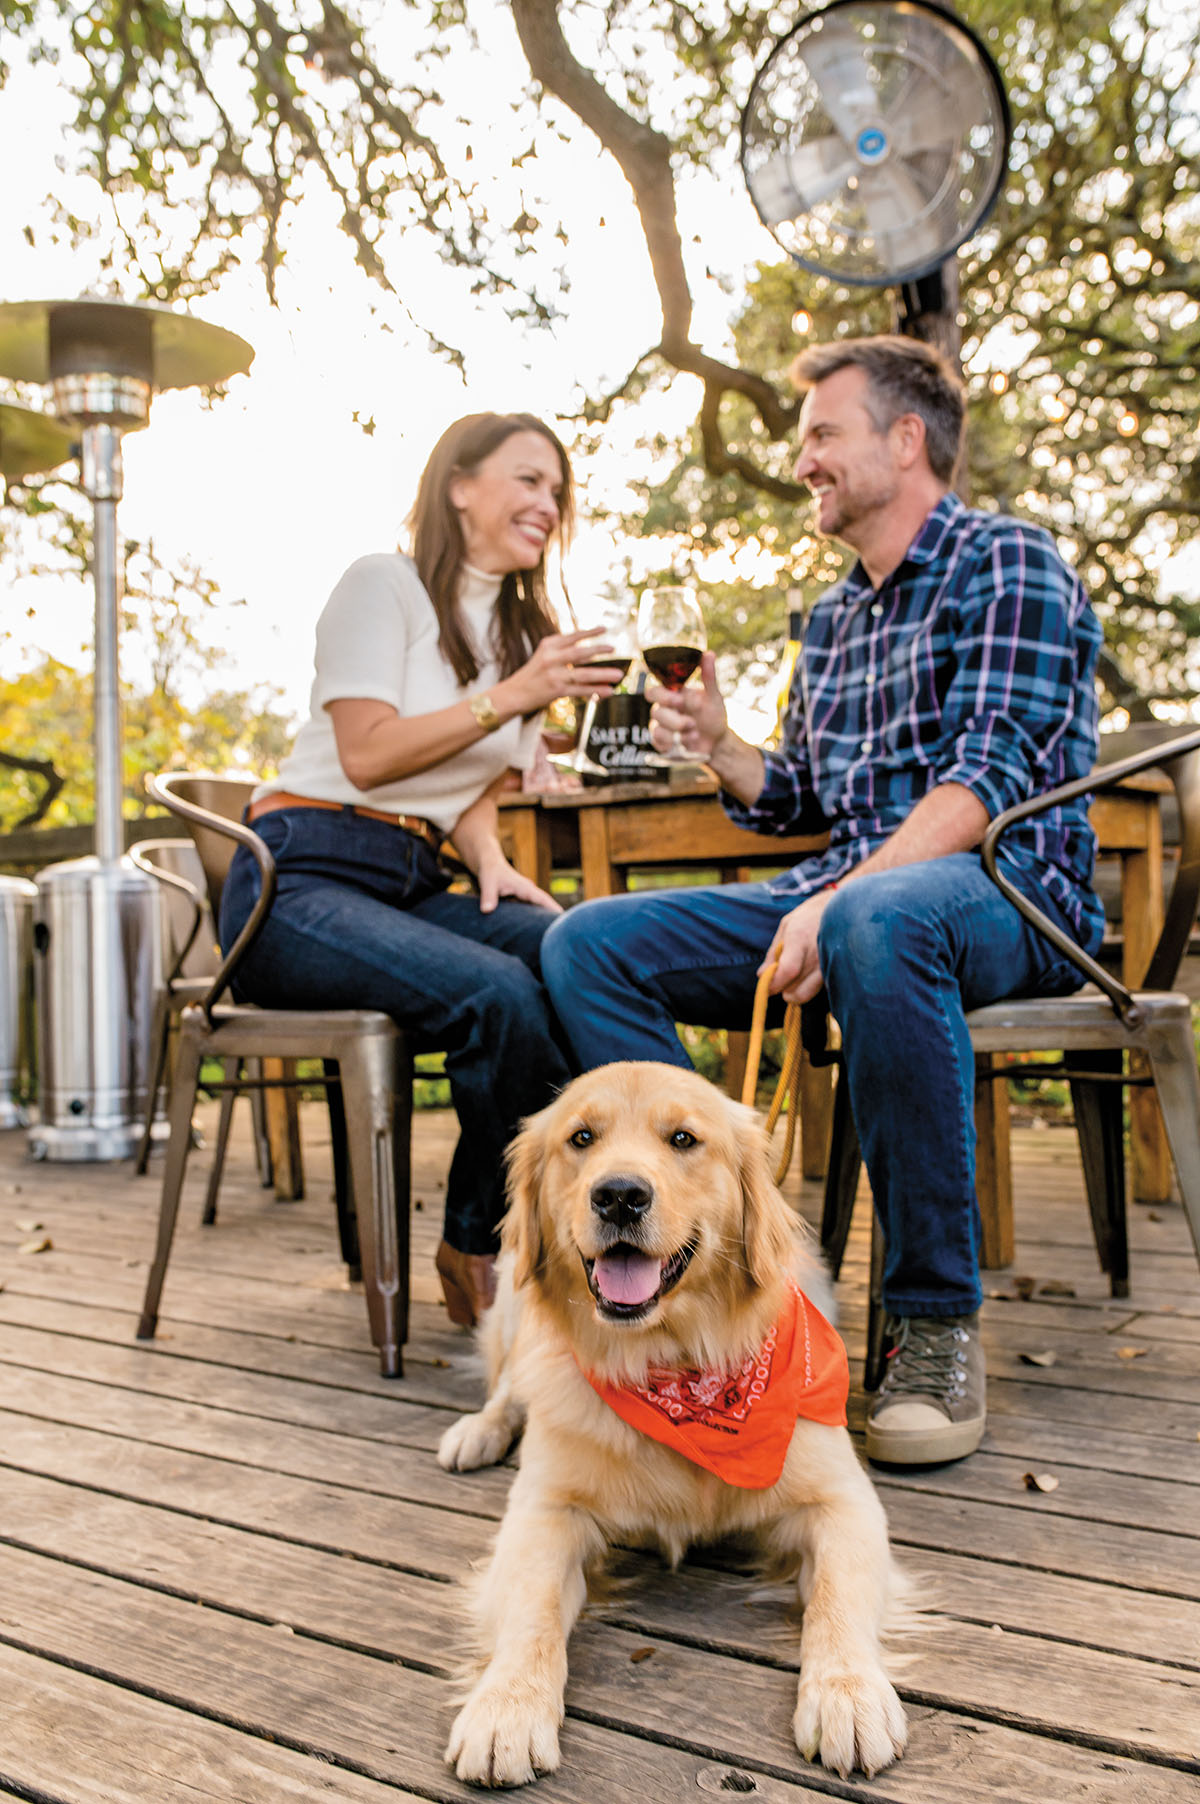 A golden retriever wearing an orange bandana looks at the camera while two people laugh and sip wine in the background